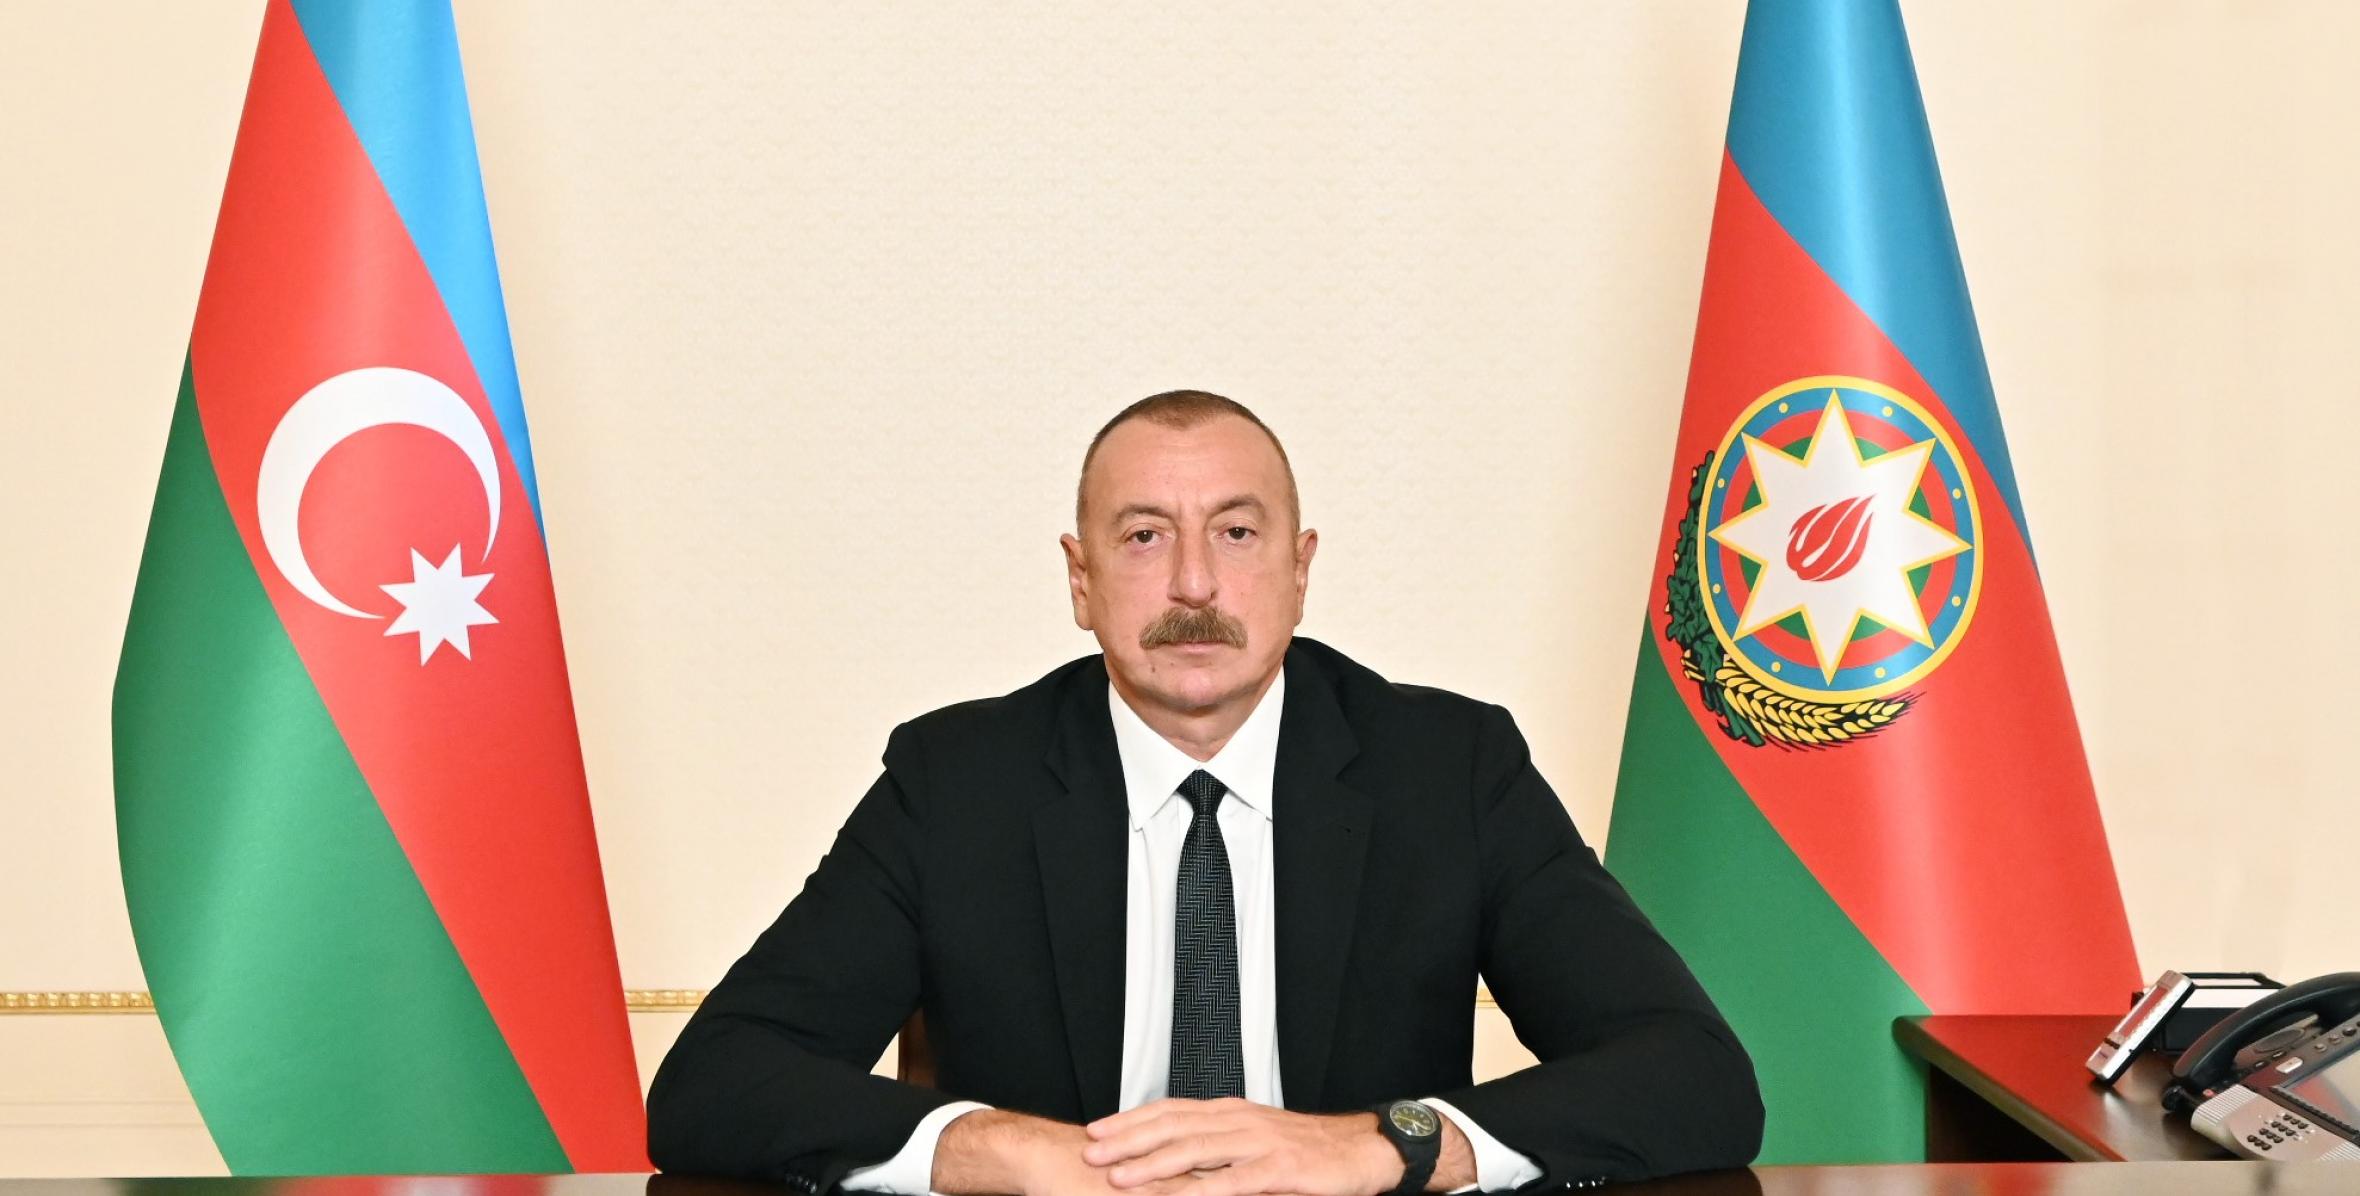 Ilham Aliyev’s statement presented at Mid-Term Ministerial Conference of Non-Aligned Movement in video format